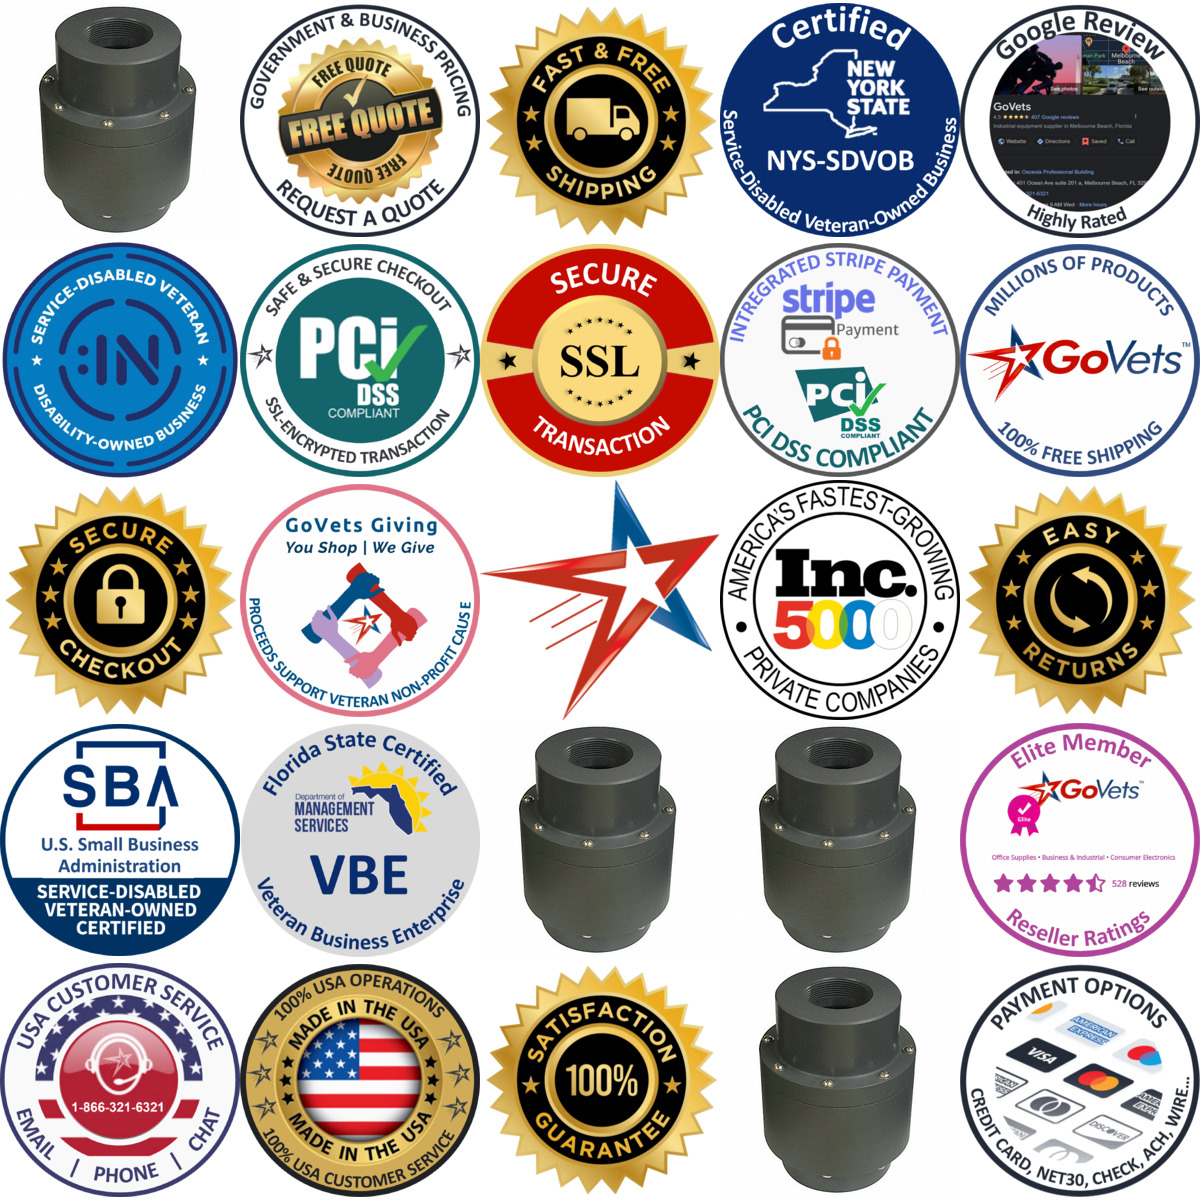 A selection of Liquid Level Control Valves products on GoVets